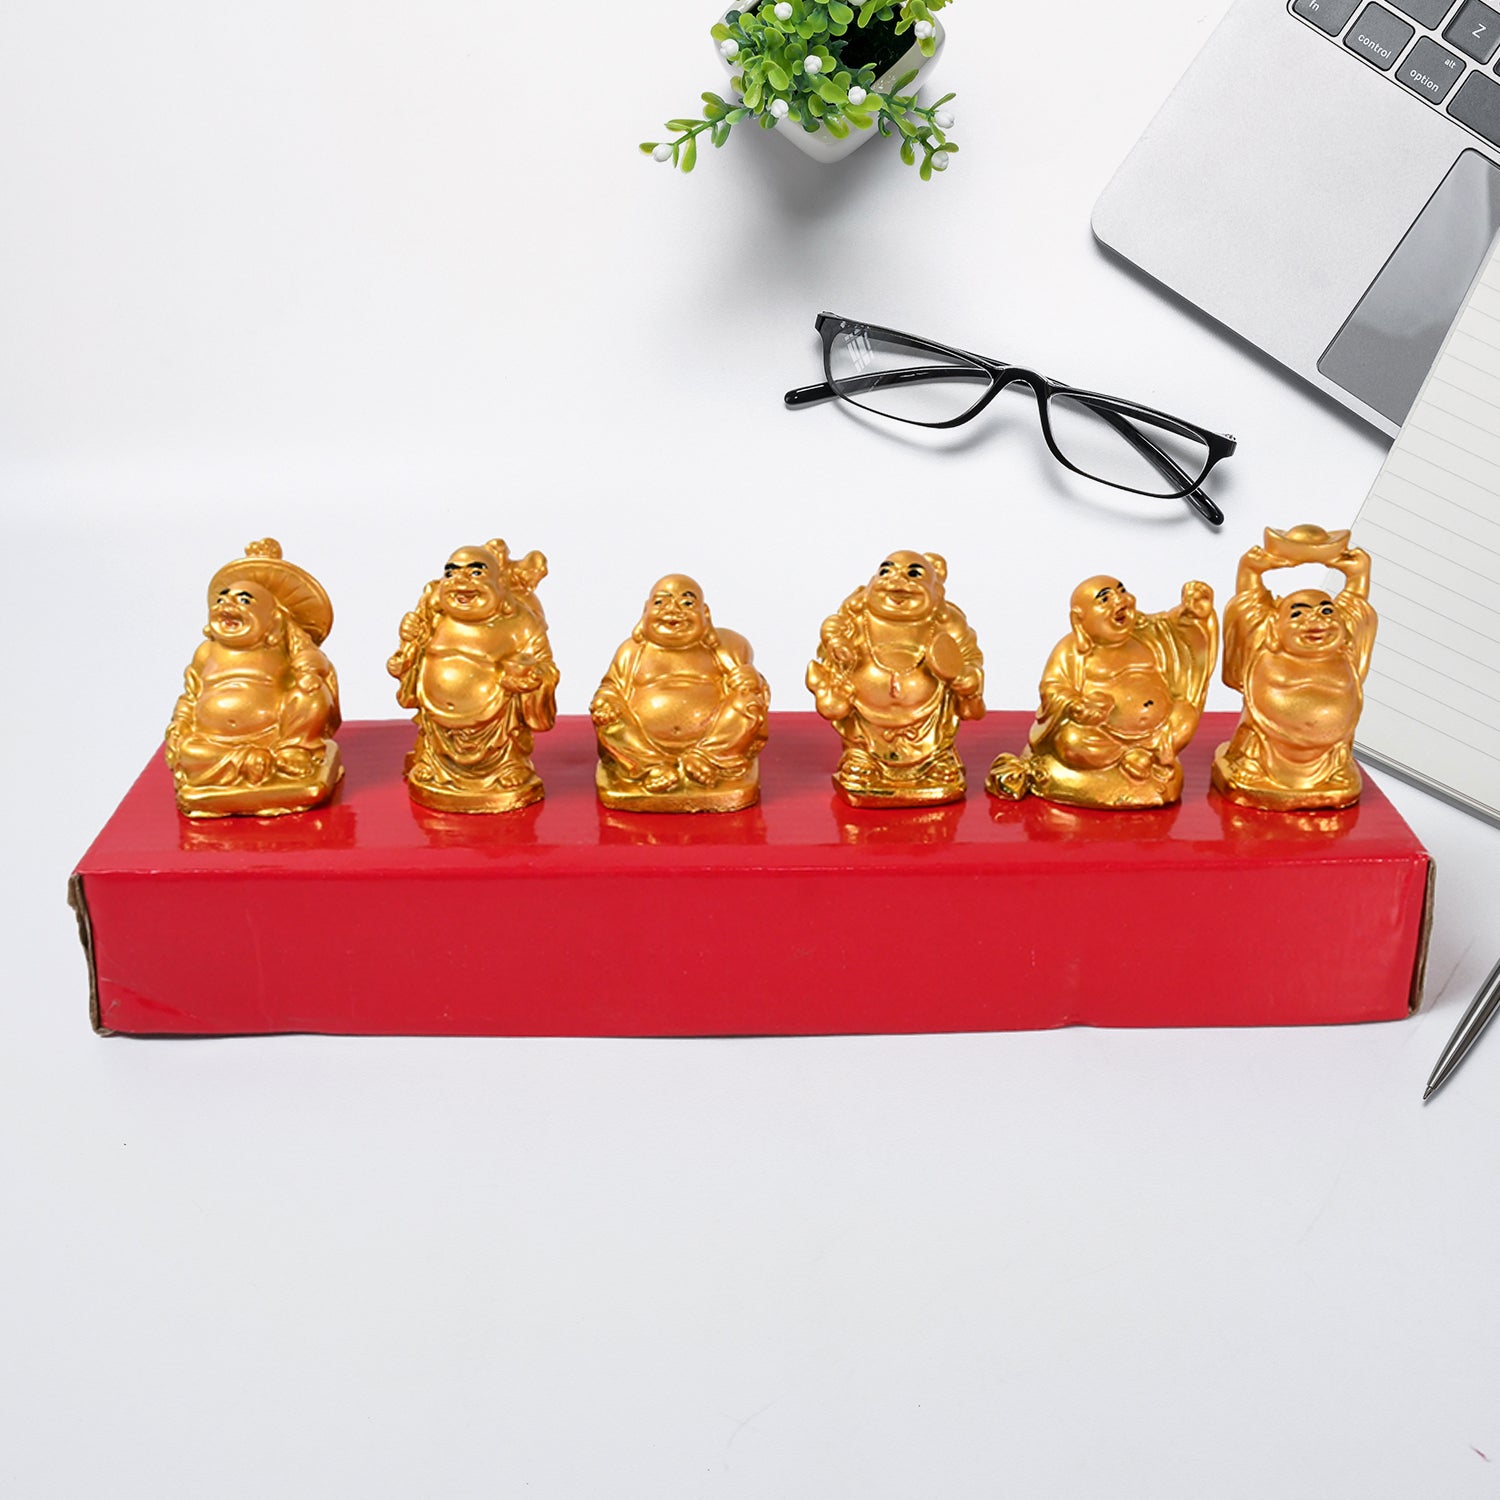 17924 Golden Laughing Buddha Set Of Six Pieces Statue For Happiness, Wealth & Good luck Decor For Wealth and Success (6 Pcs Set)